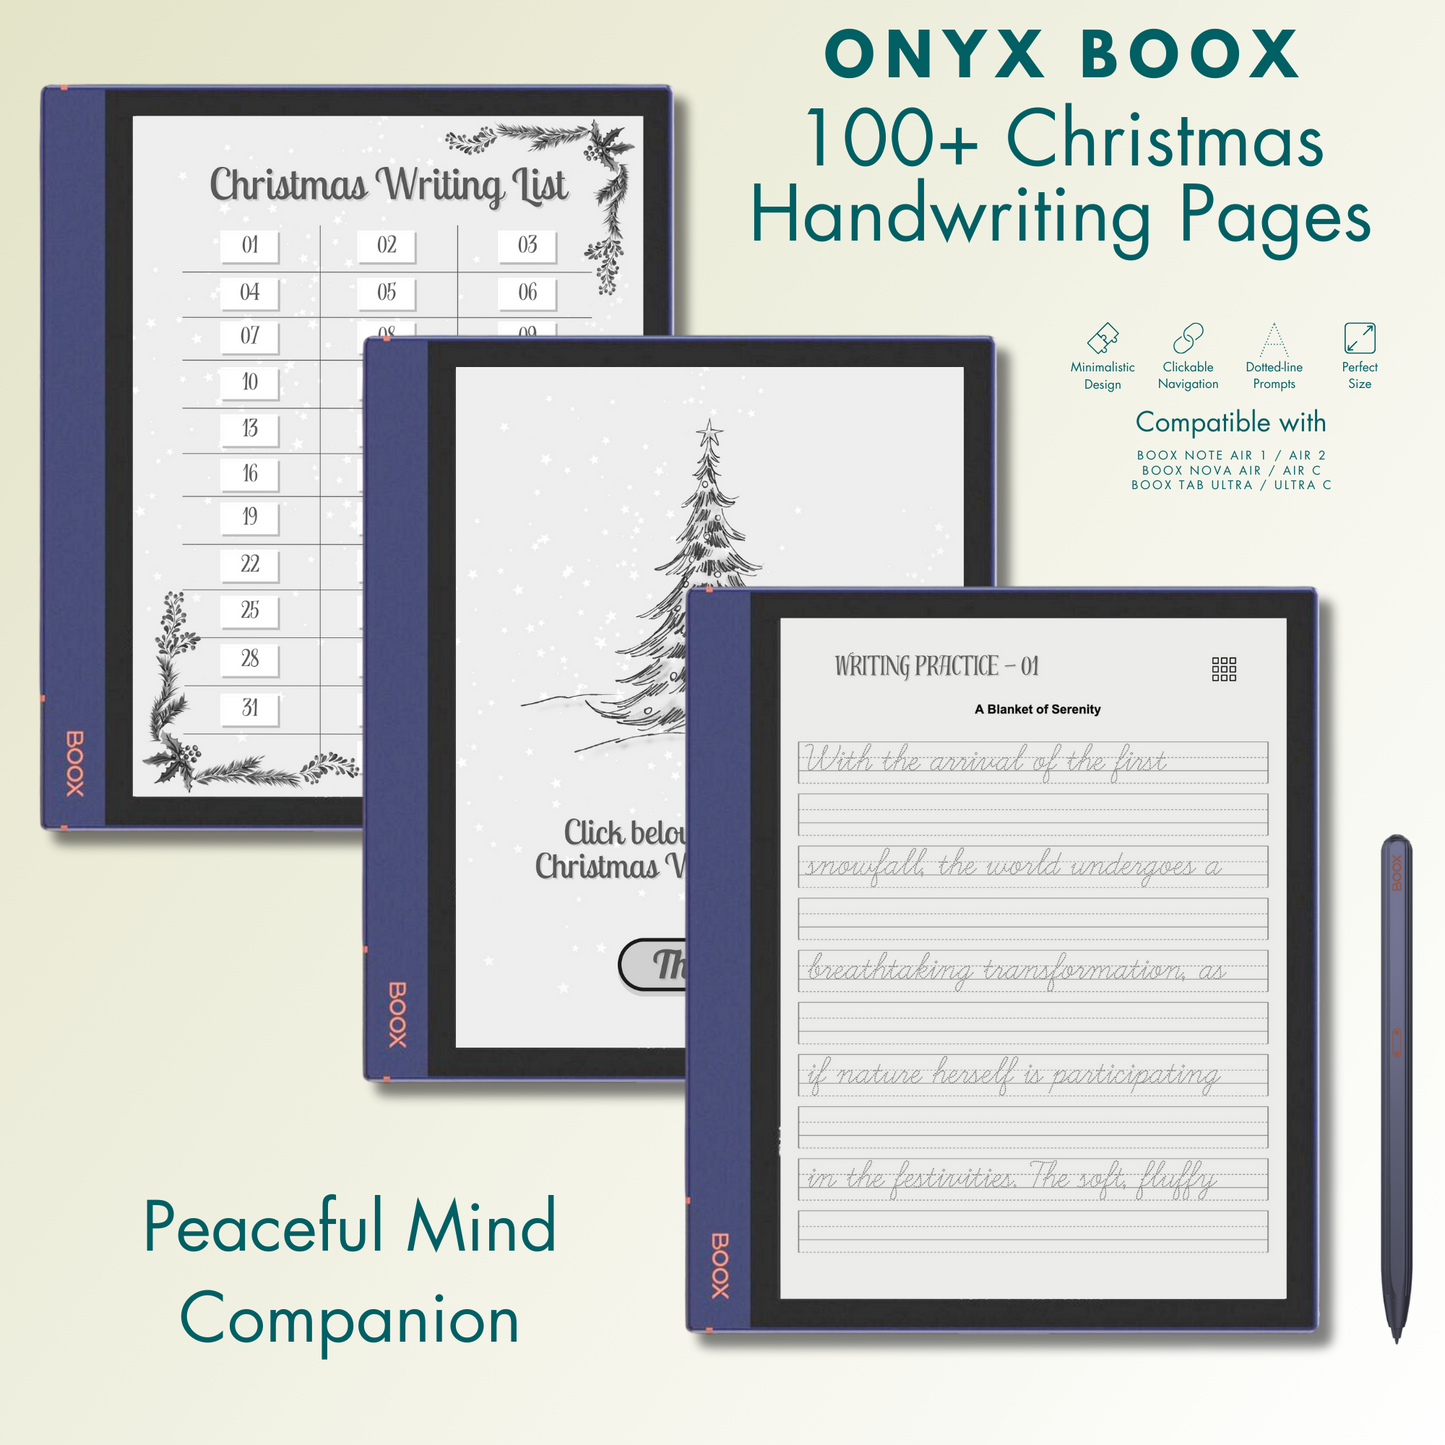 Onyx Boox Christmas Writing Pages.